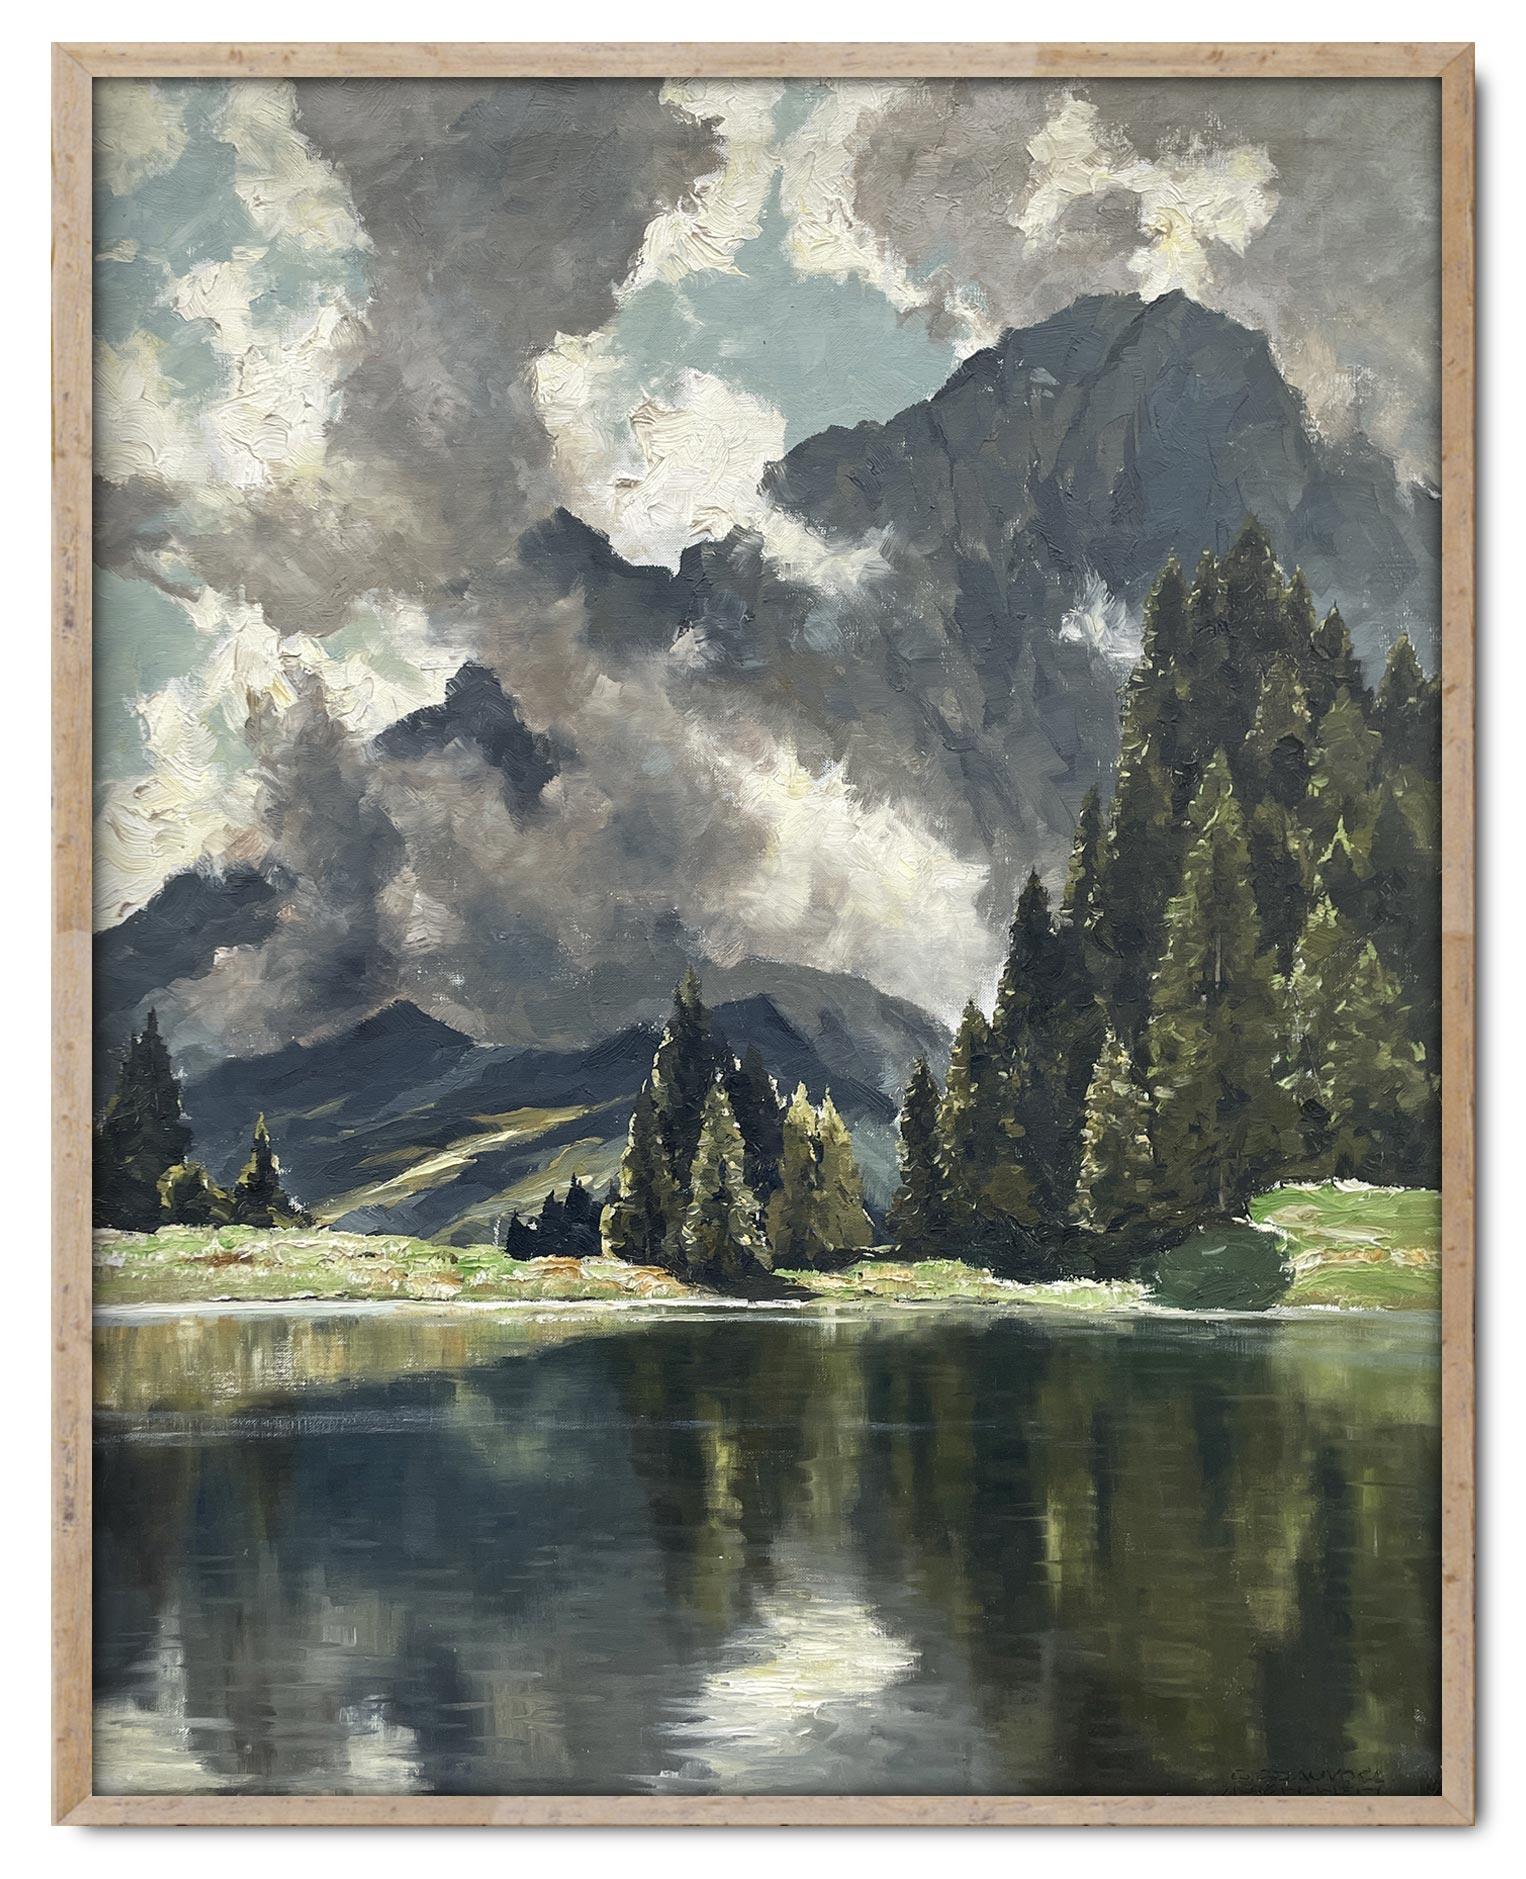 Art Deco View of Lake Limides Italian Dolomites Oil on Canvas by Georg Grauvogl 